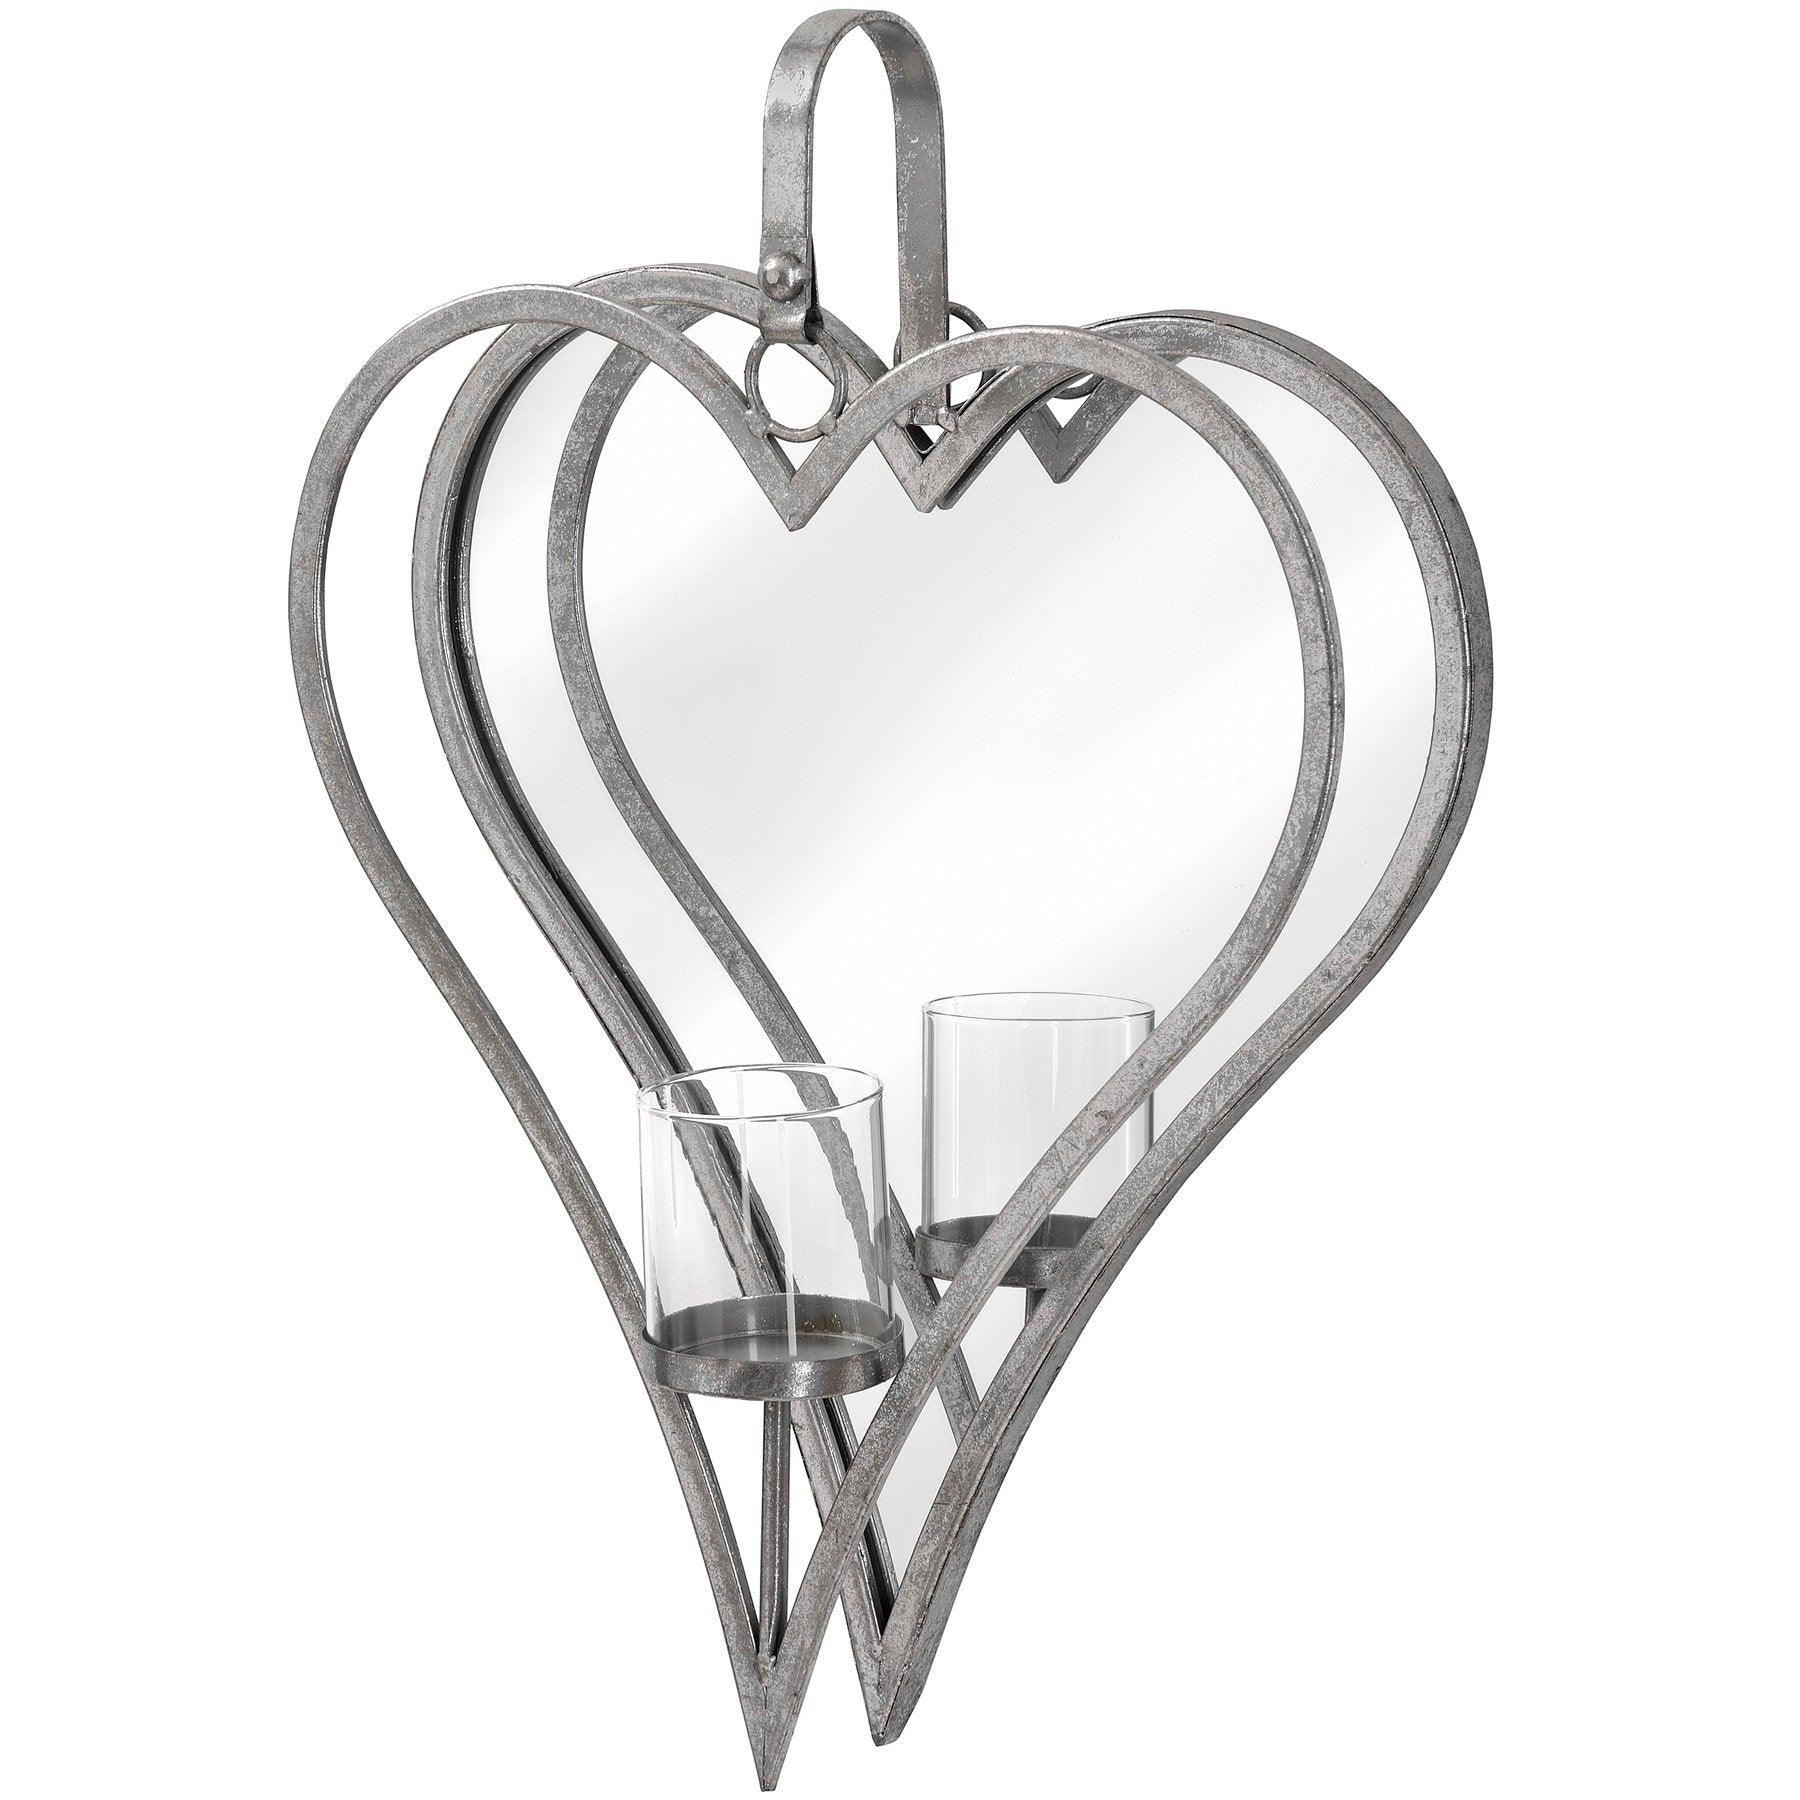 Large Antique Silver Mirrored Heart Candle Holder - Vookoo Lifestyle